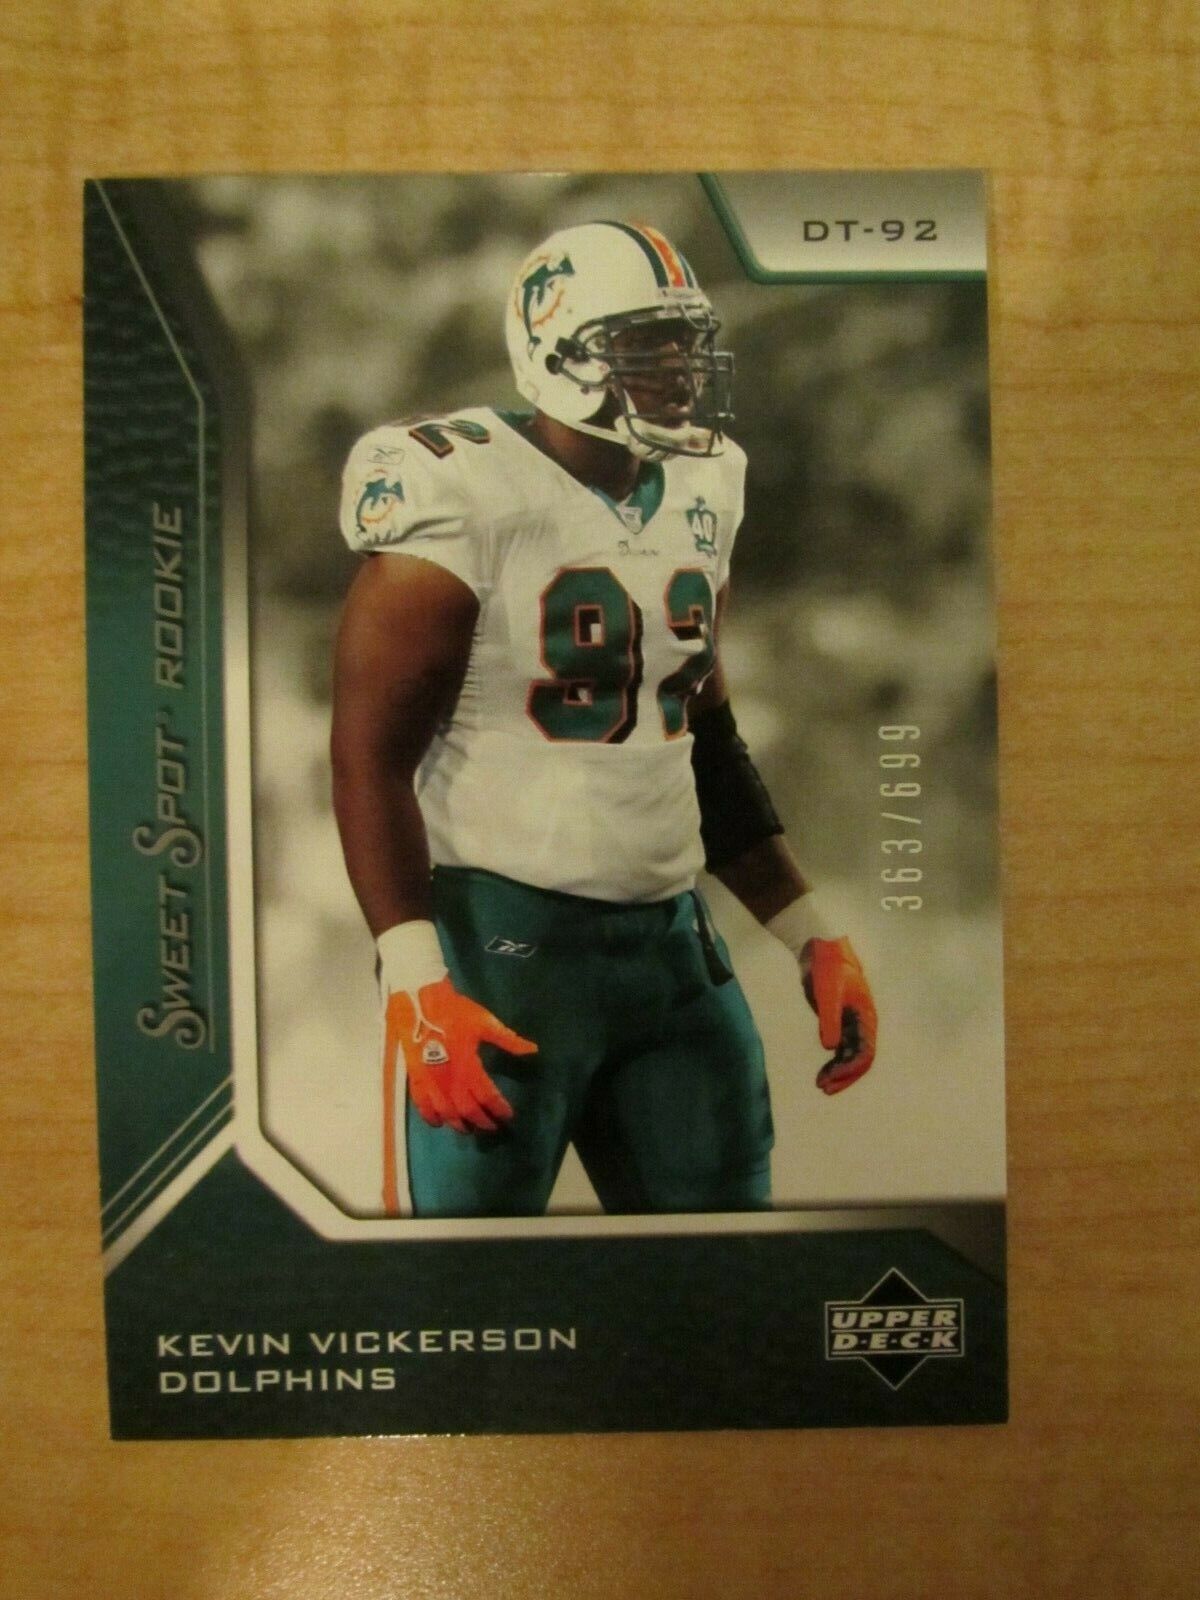 2005 Upper Deck Sweet Spot Rookie Kevin Vickerson 363/699 #145 Miami Dolphins